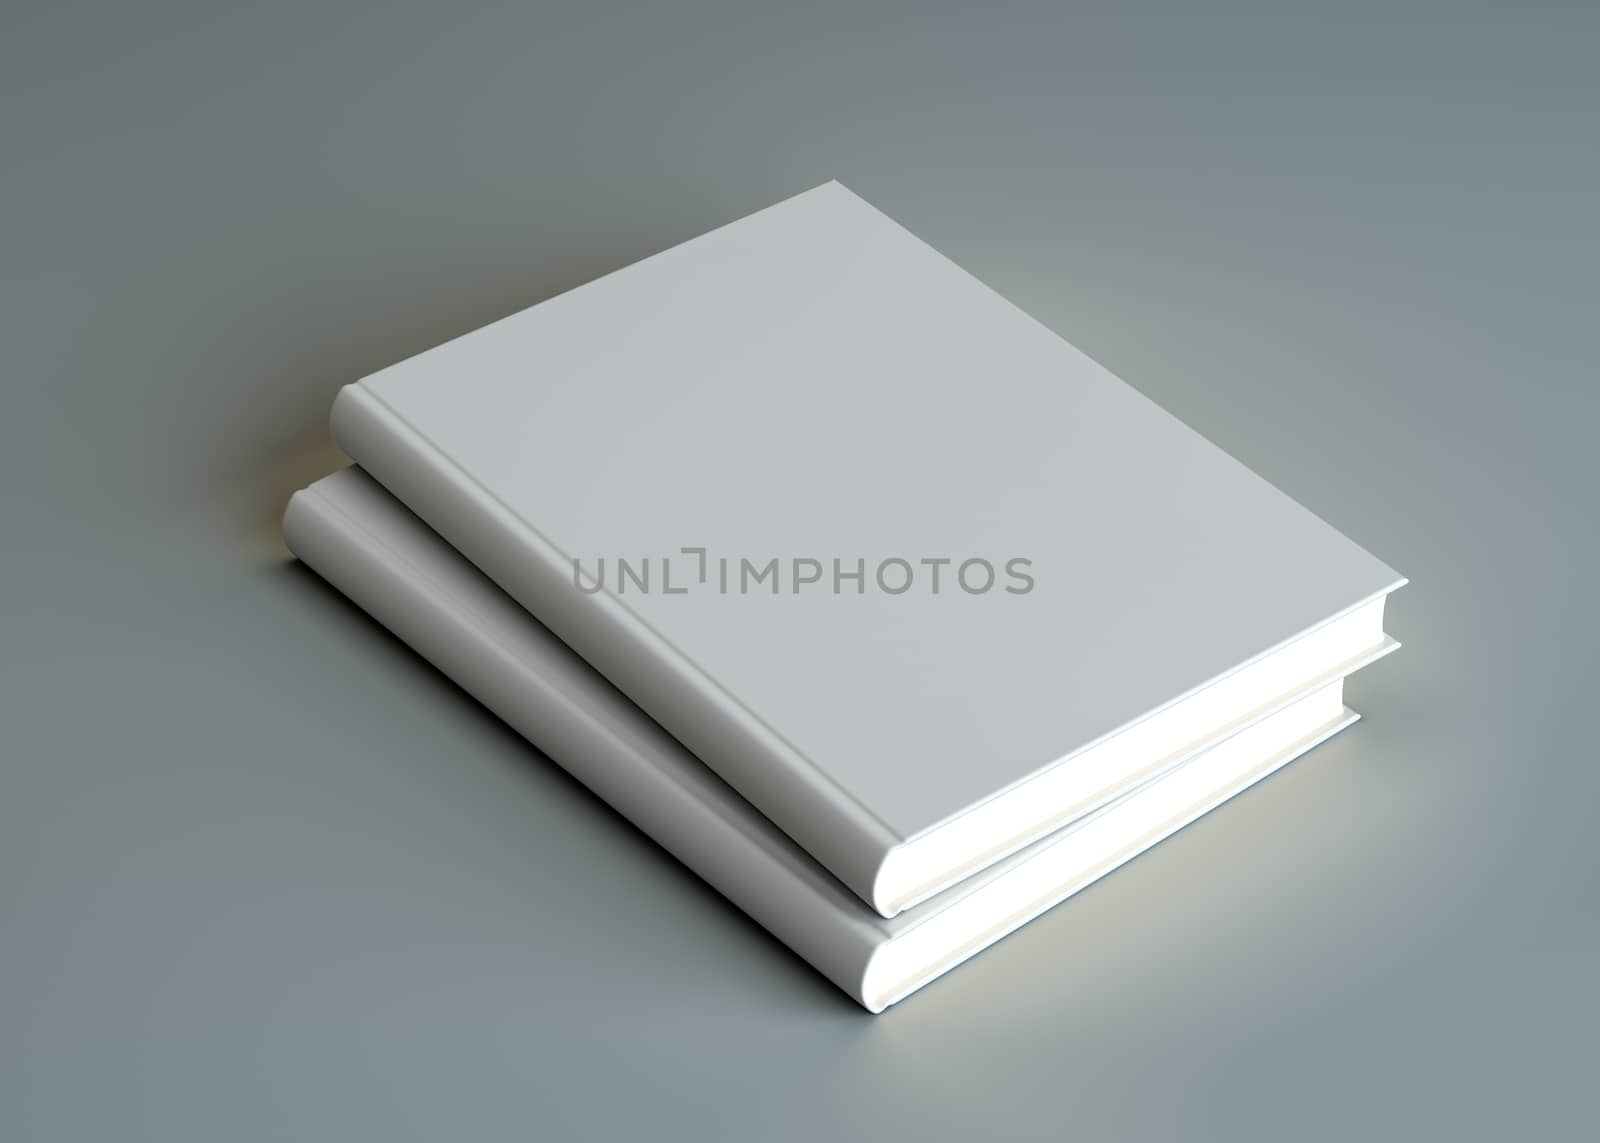 Two closed white empty books lie on a dark background. The pages are glowing. The concept of learning or advertising publications. 3d illustration